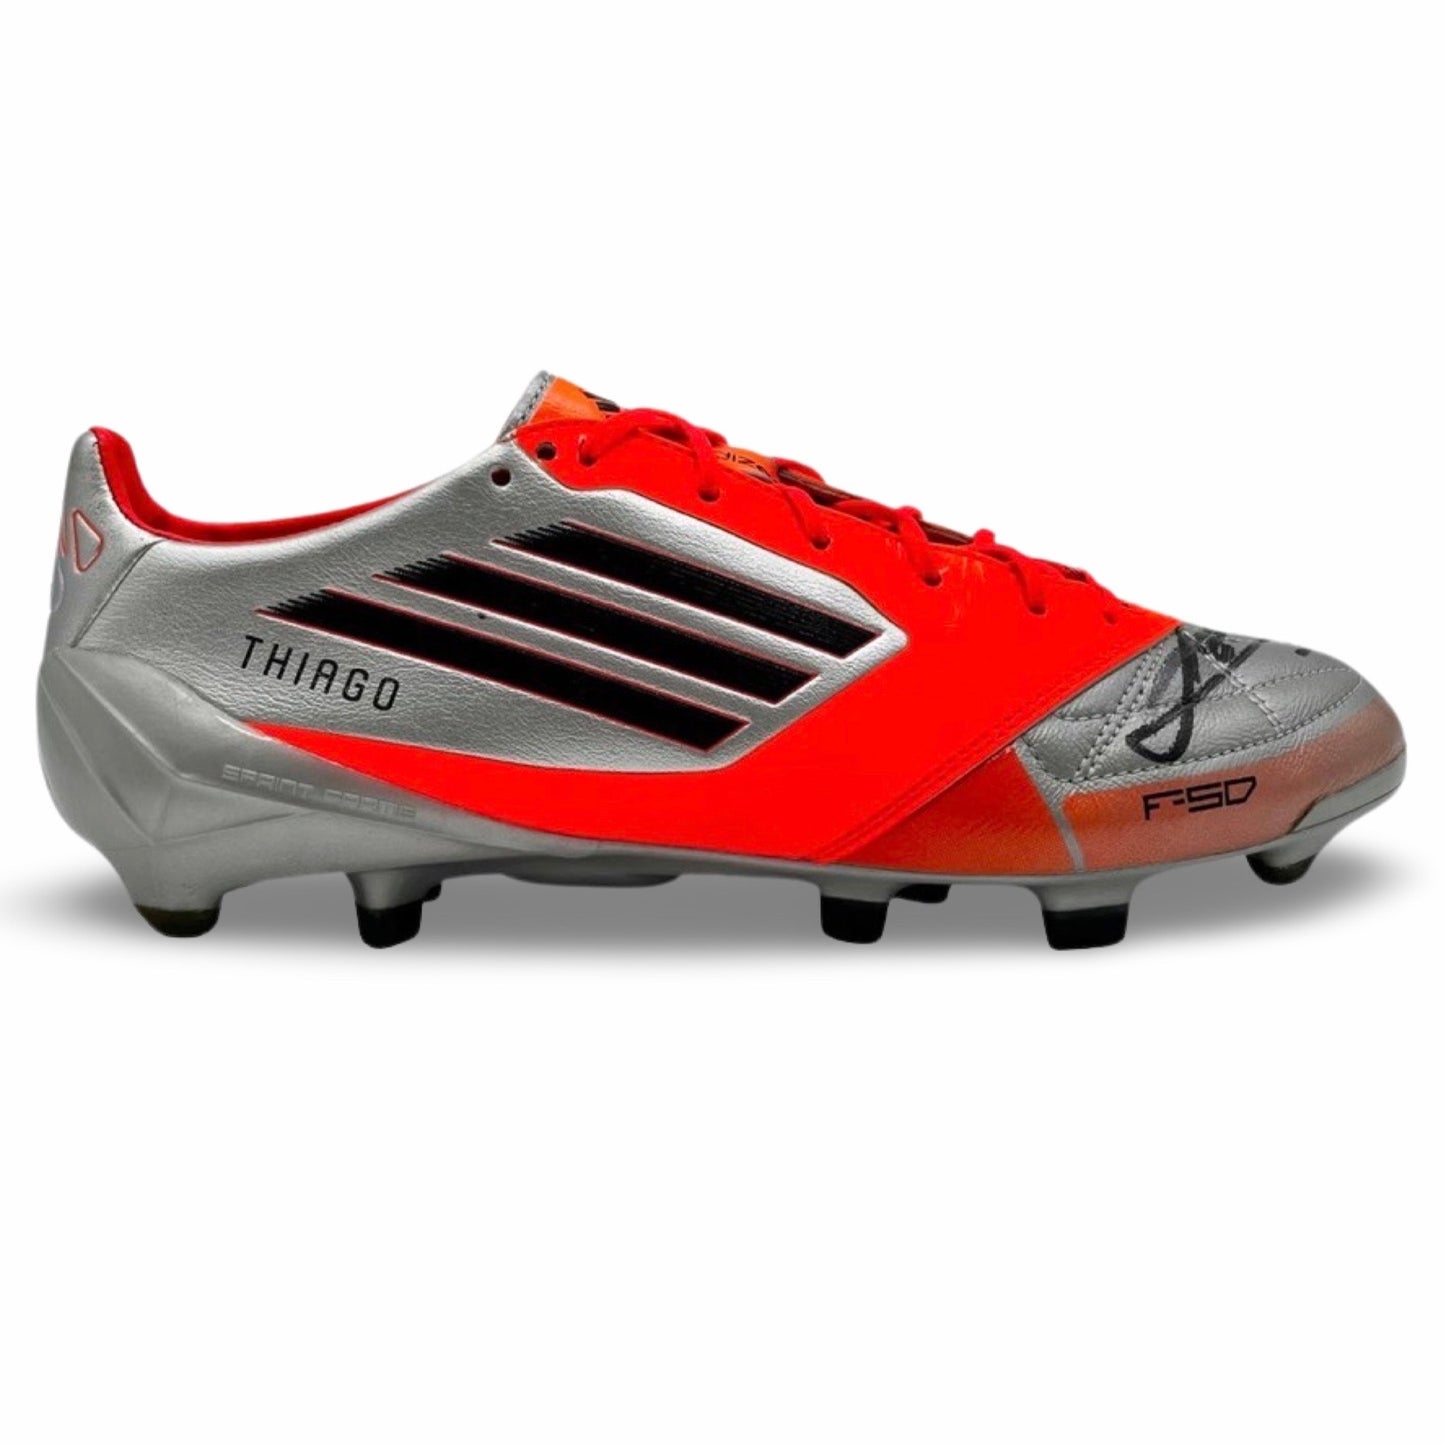 Lionel Messi Match Worn Adidas F50 Adizero Leather Signed Record Breaking 91 Goal Year 2012